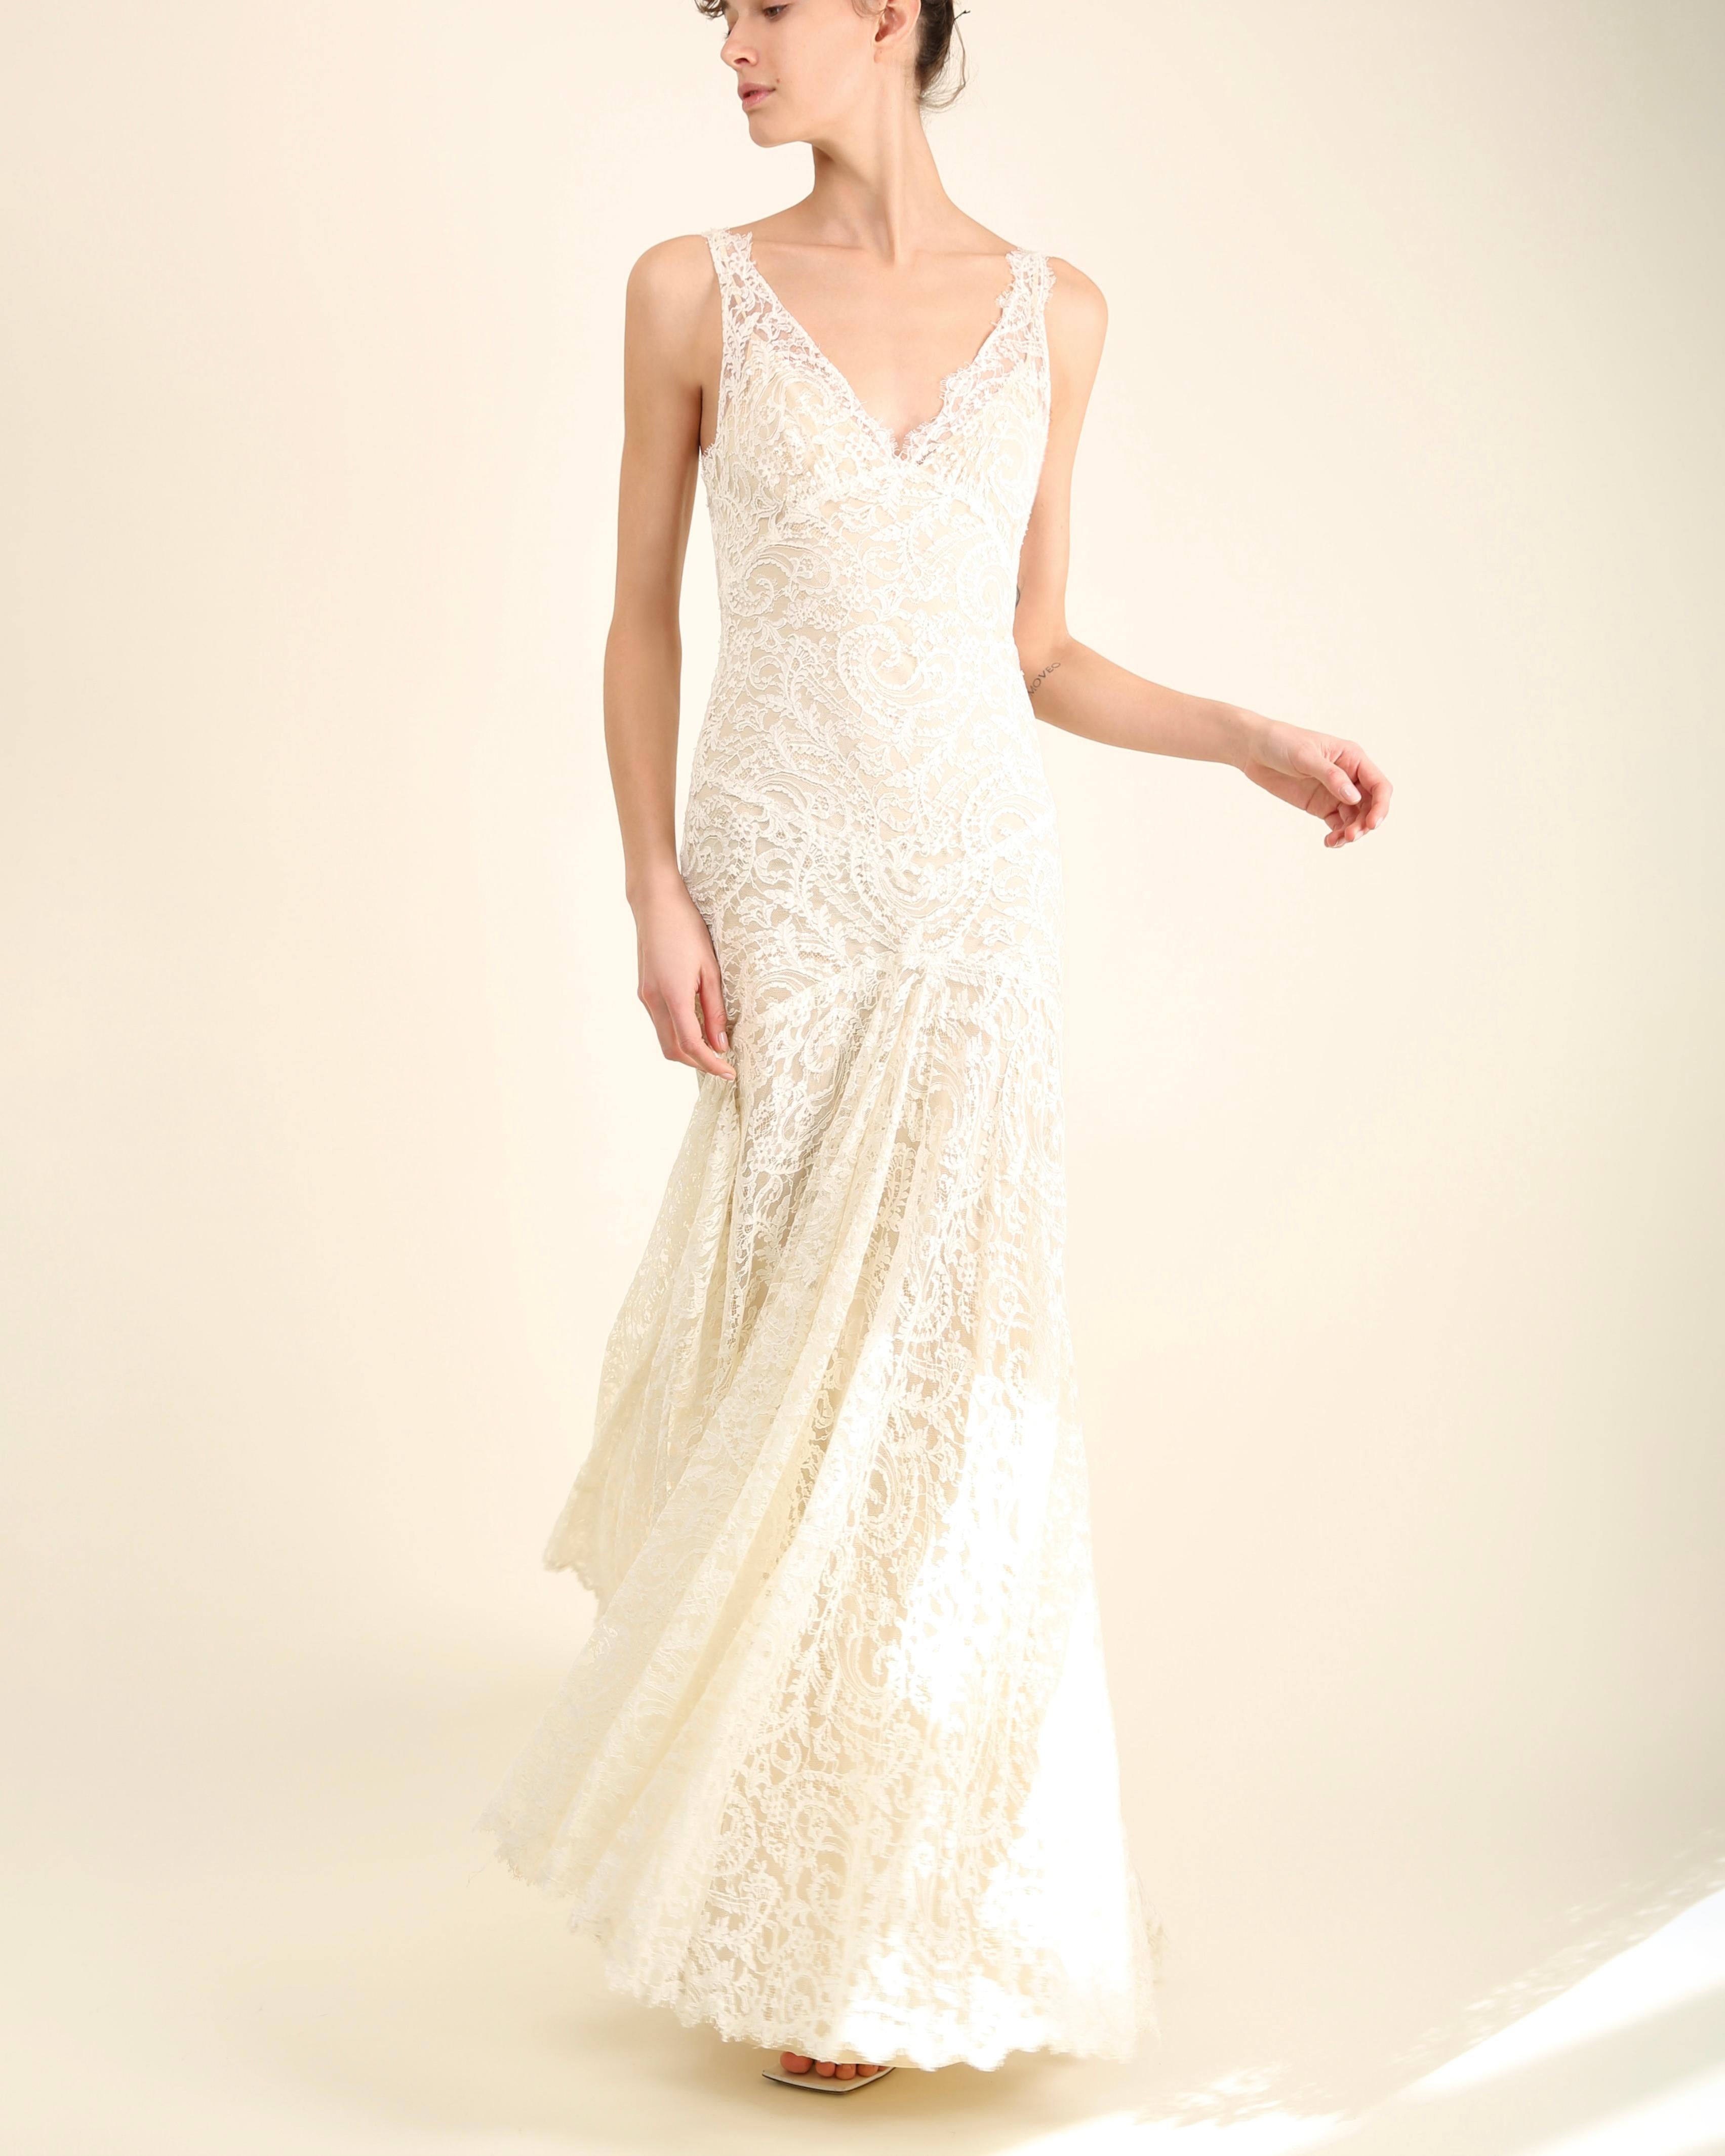 Monique Lhuillier ivory lace plunging backless wedding gown with train dress  8